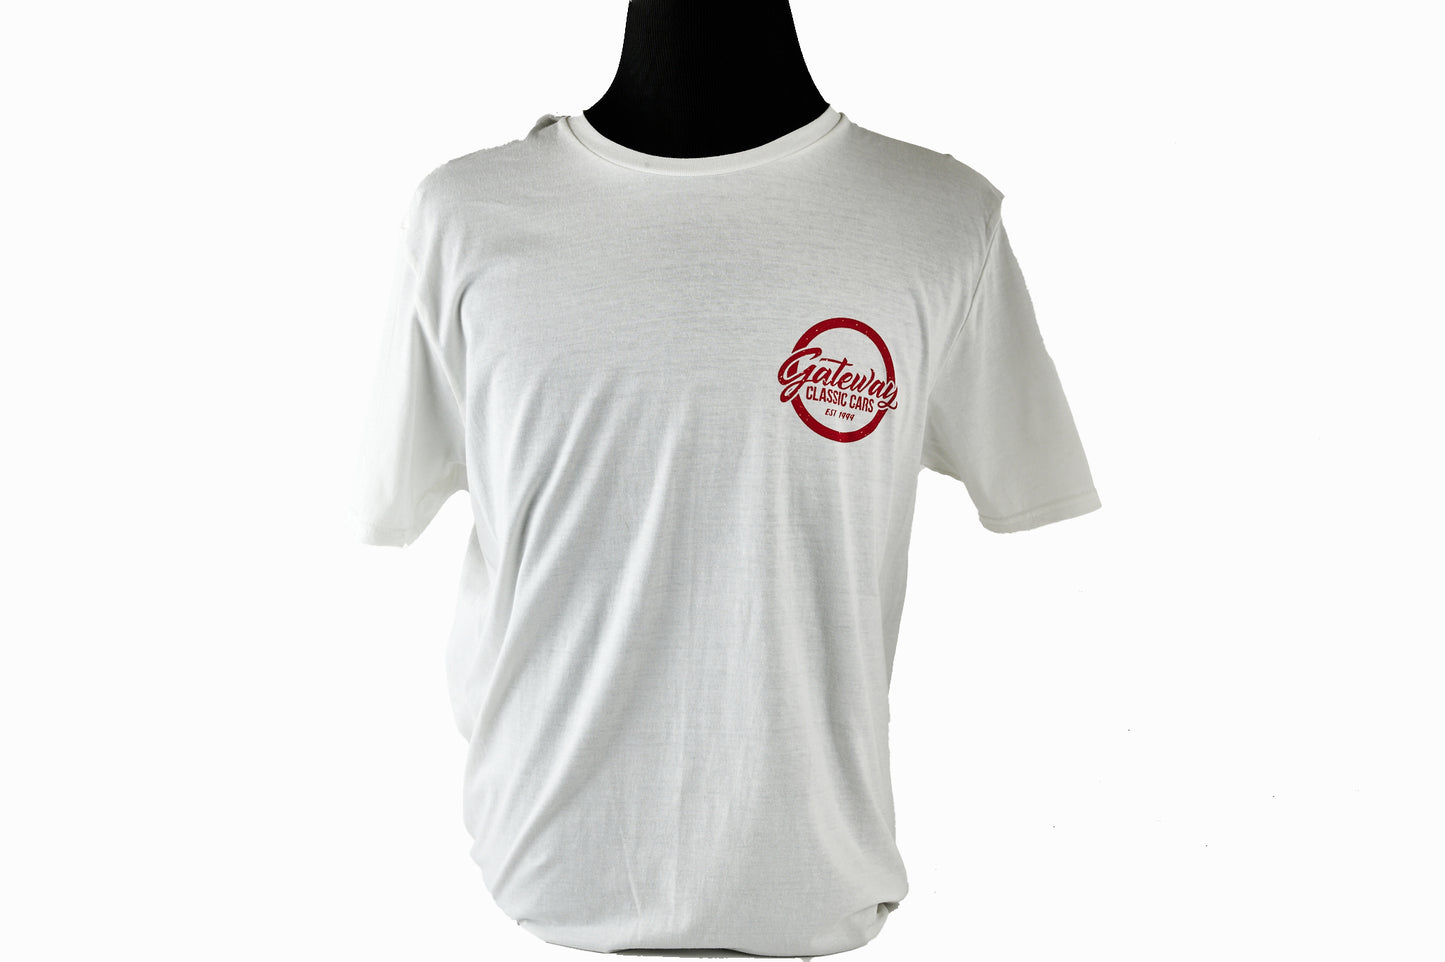 Do Not Touch White T-Shirt With Red Graphics Size M-XXXL